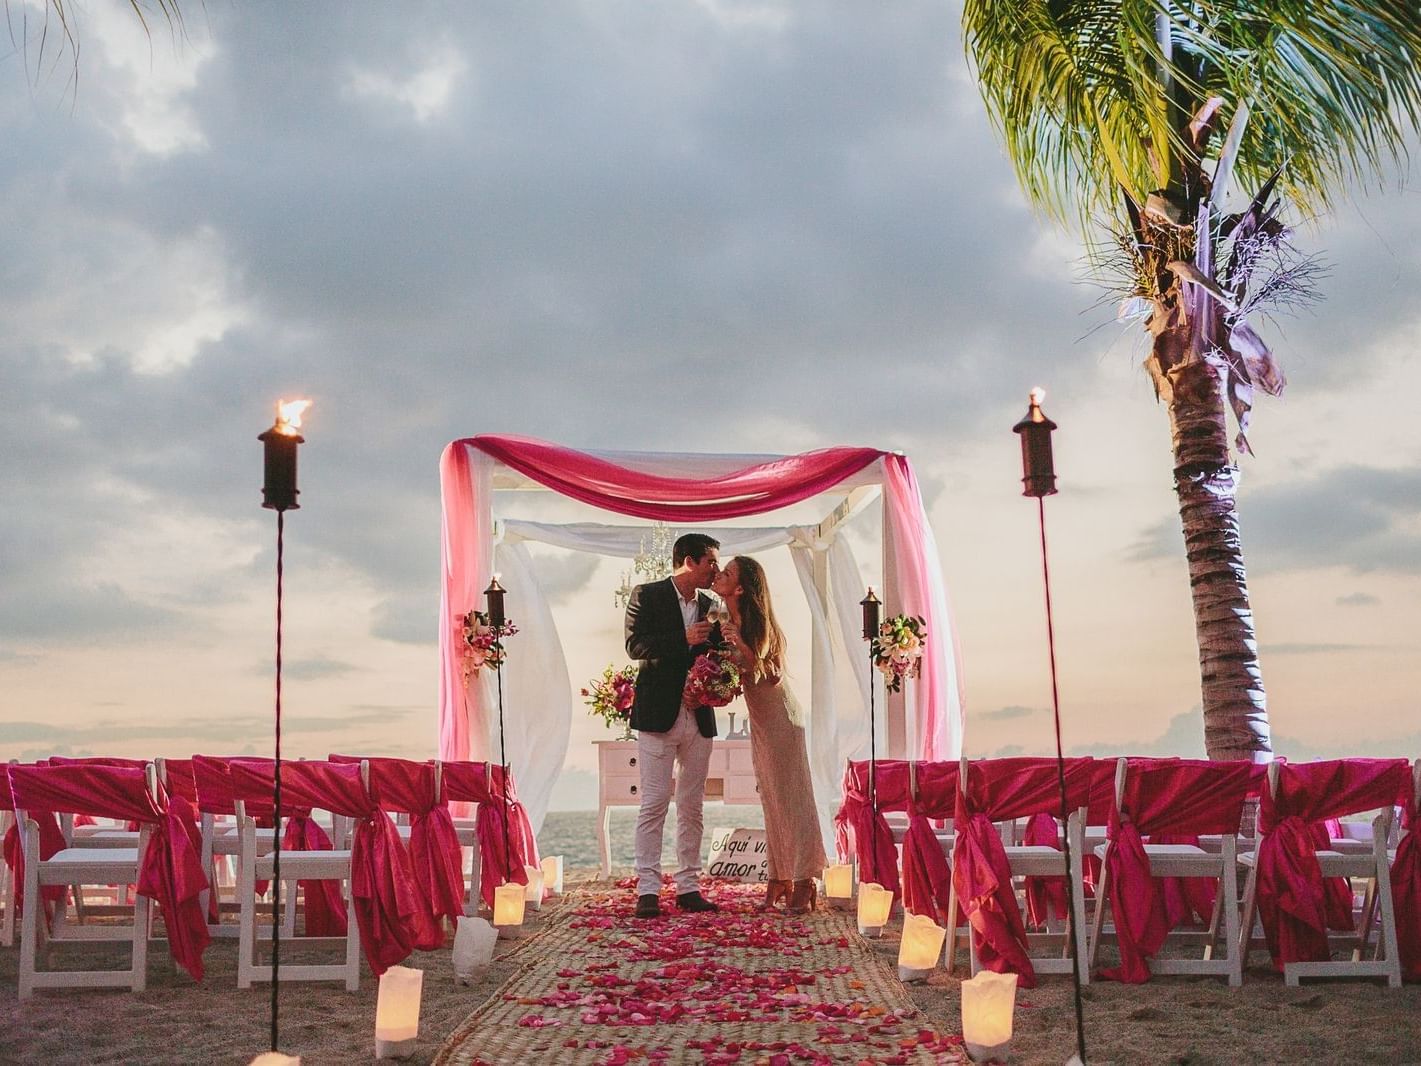 Couple kissing by the aisle at an outdoor wedding, La Colección